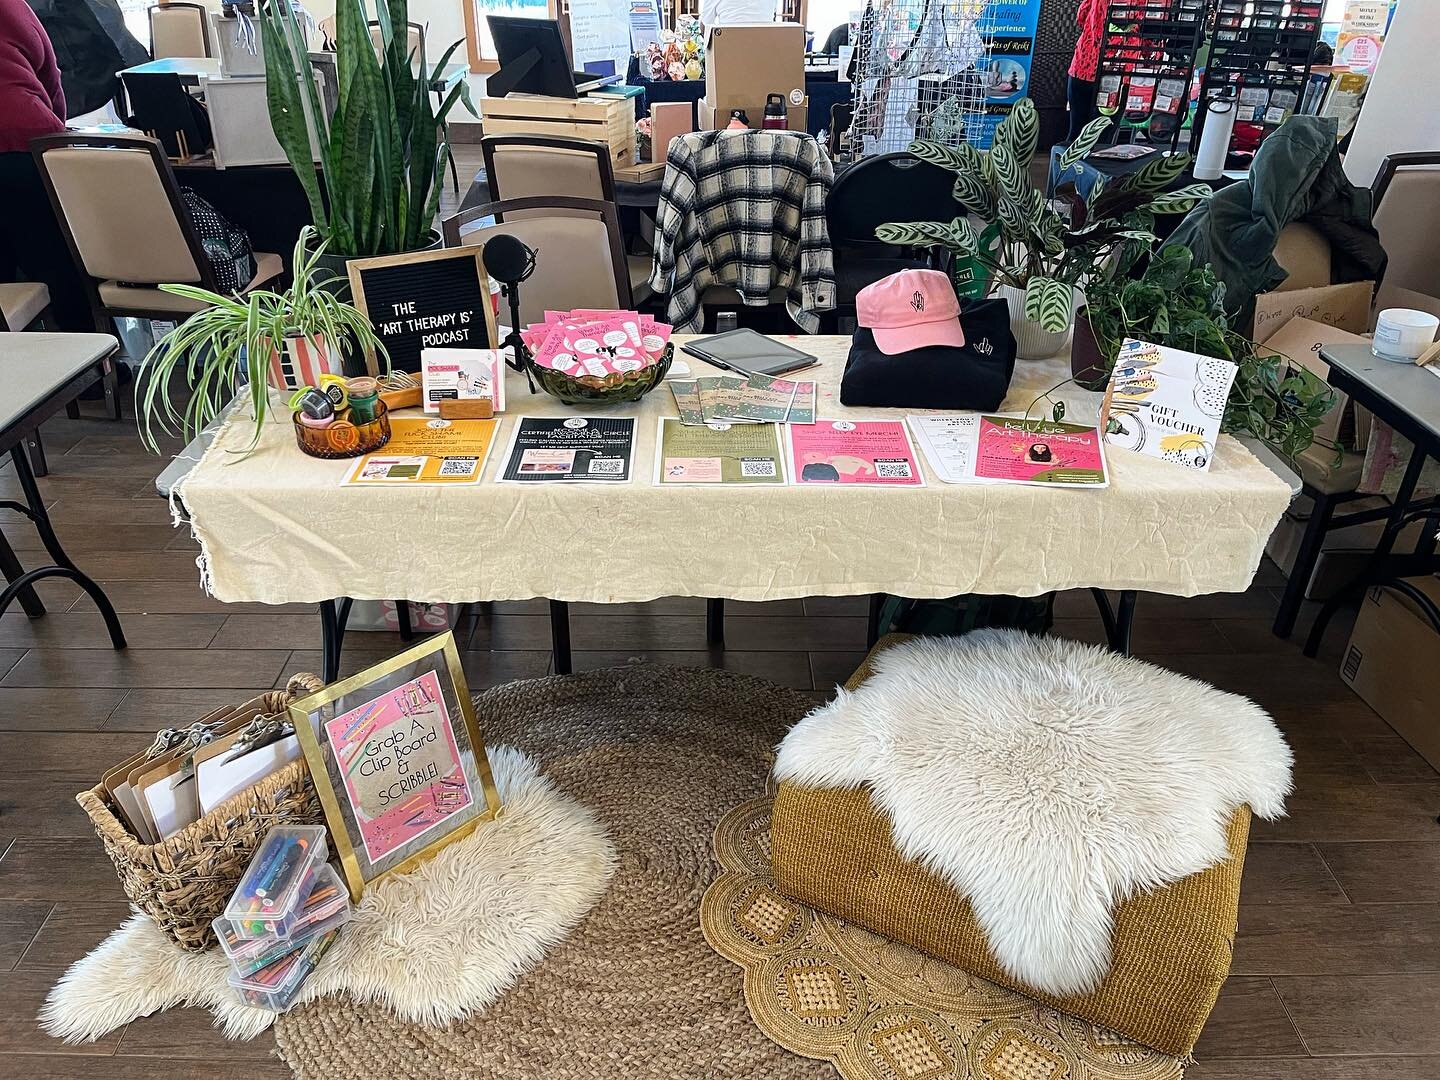 Babies first Market 🙋🏻&zwj;♀️😂✨
.
.
All set up at The Women&rsquo;s Wellness Expo in Cochrane &hearts;️✨
.
.
@selfloverenovation 
.
✨Art Therapy 
✨Women&rsquo;s Circle Facilitator Training
✨F**k Shame Club
✨Collaboration 
✨ @arttherapy.is Podcast
